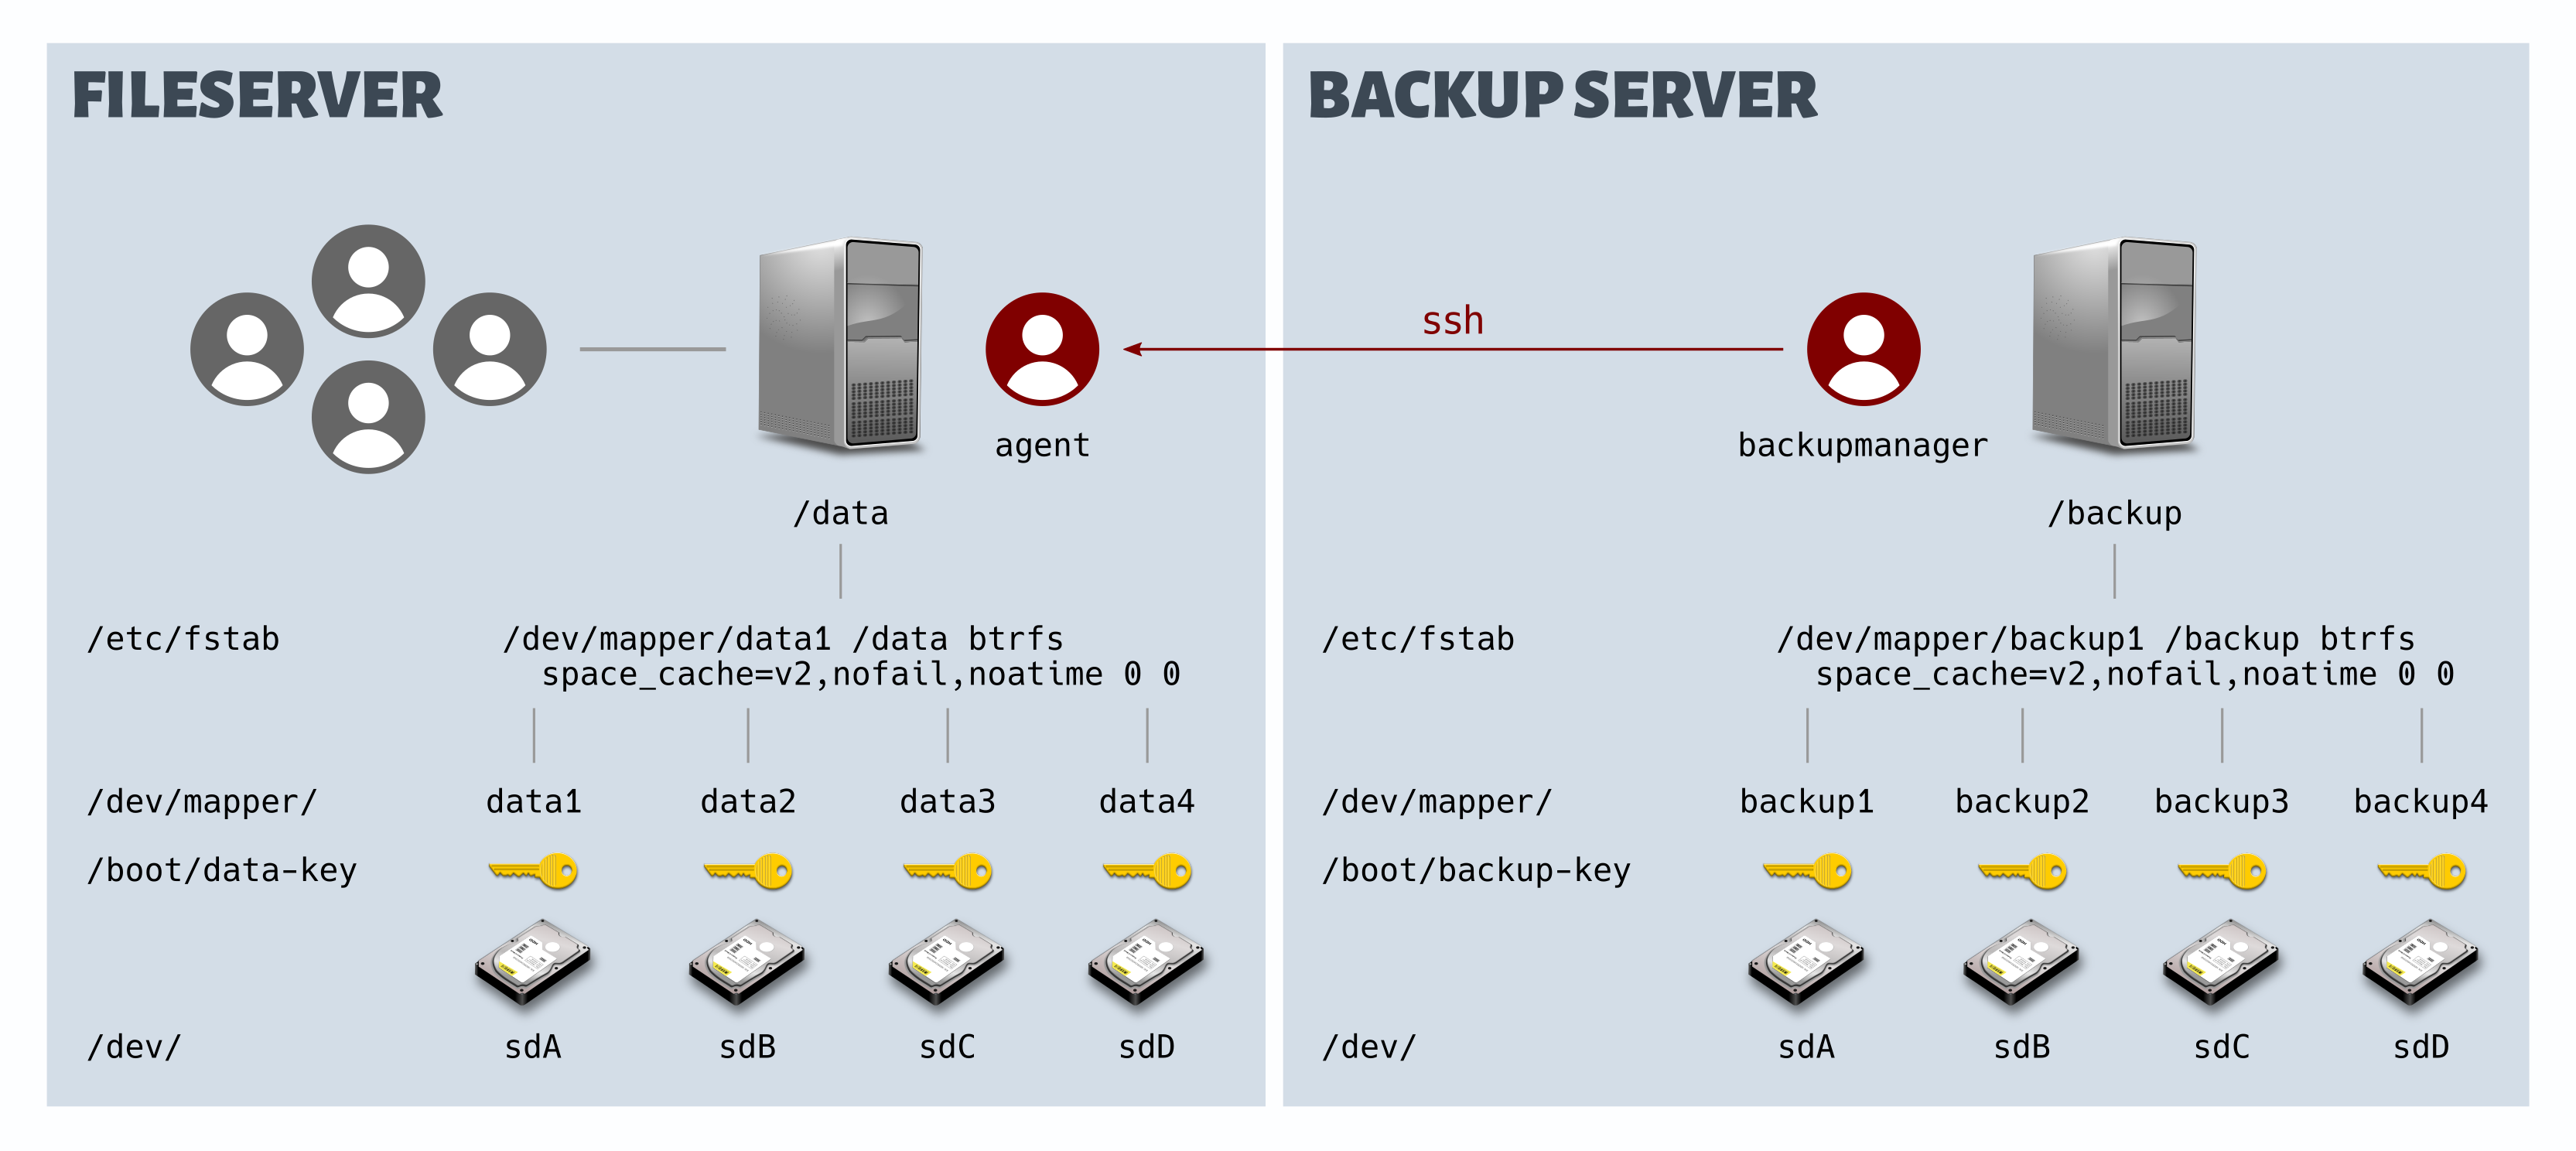 Schematic overview of a secure backup setup using two servers. On the left half of the image, the file server is visualized as a computer case. Its configuration, including storage devices, is shown as layers, shown underneath the server case. The file server has regular users, shown in gray color on the left of the server case. Another user is named 'agent'. It is shown on the right side of the file server case. The backup server is shown on the right half of the graphics, also as a computer case. Its layered configuration is identical to that of the file server, except that the word 'backup' is used wherever the word 'data' was used on the file server side. The 'root' user of the backup server is shown in red, on the left side of the backup server. It connects to the user 'agent' of the file server, via ssh, indicated by a red arrow that connects them.